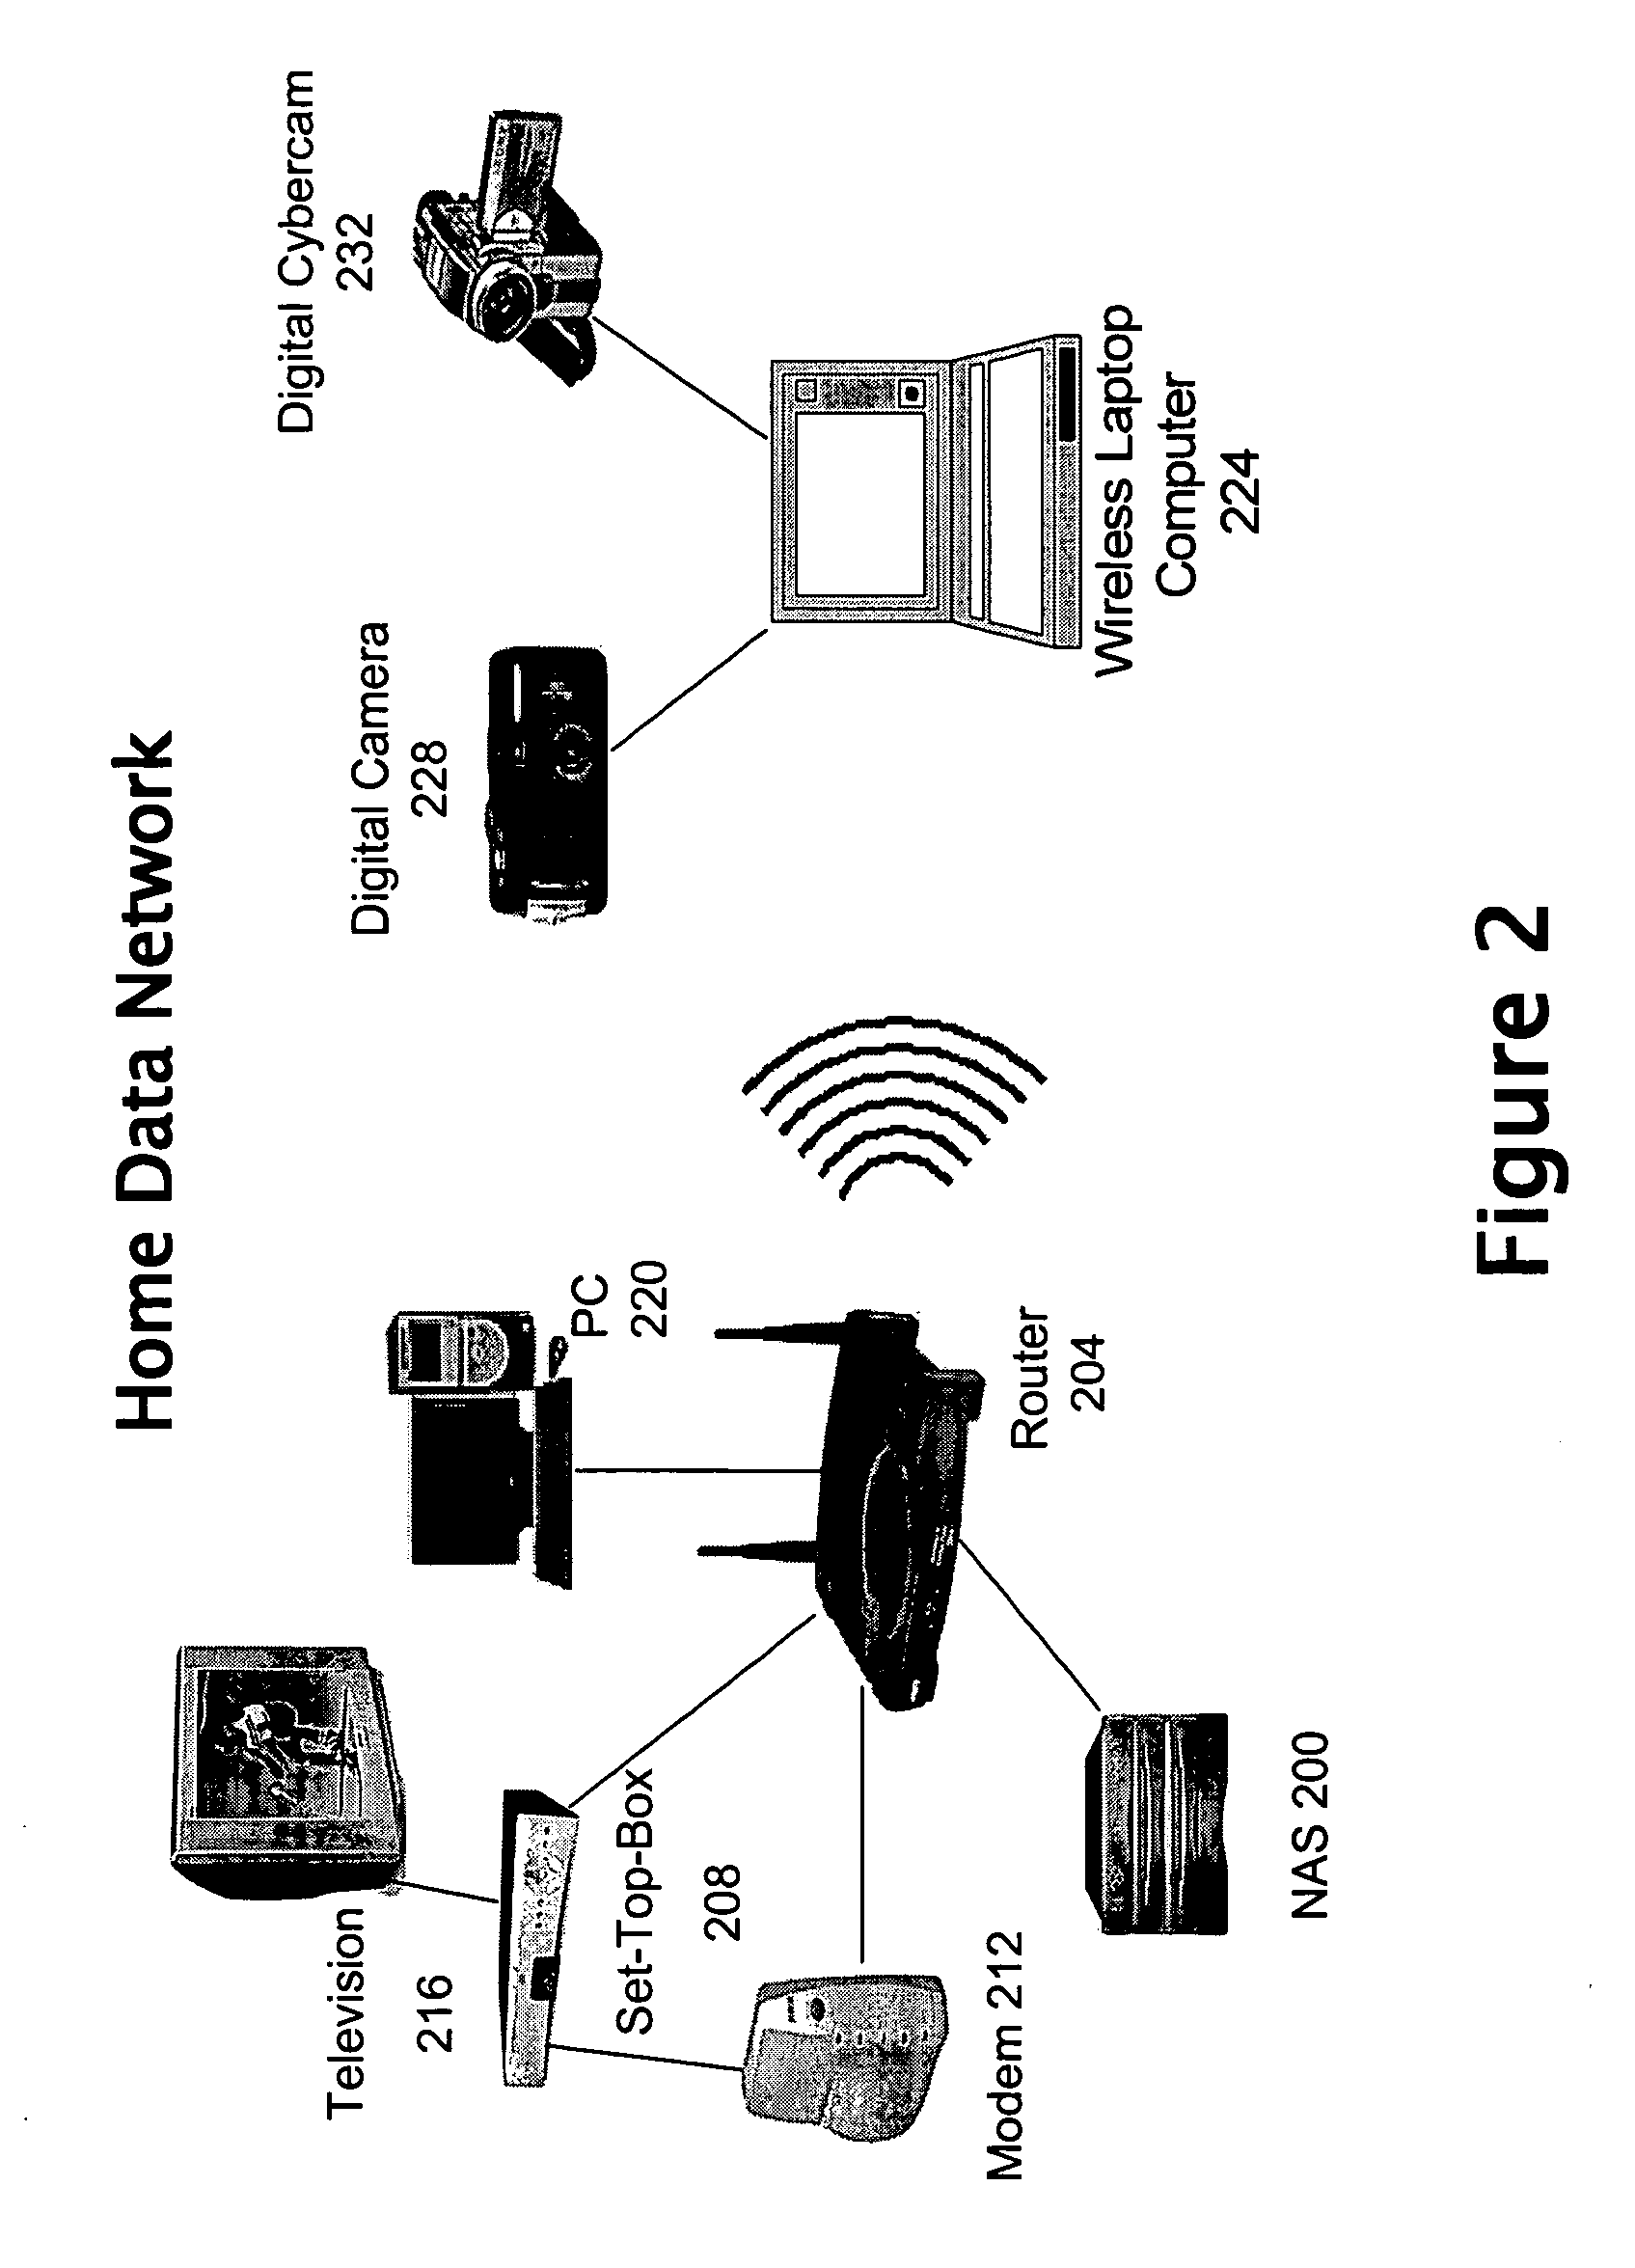 Data storage system and method that supports personal video recorder functionality